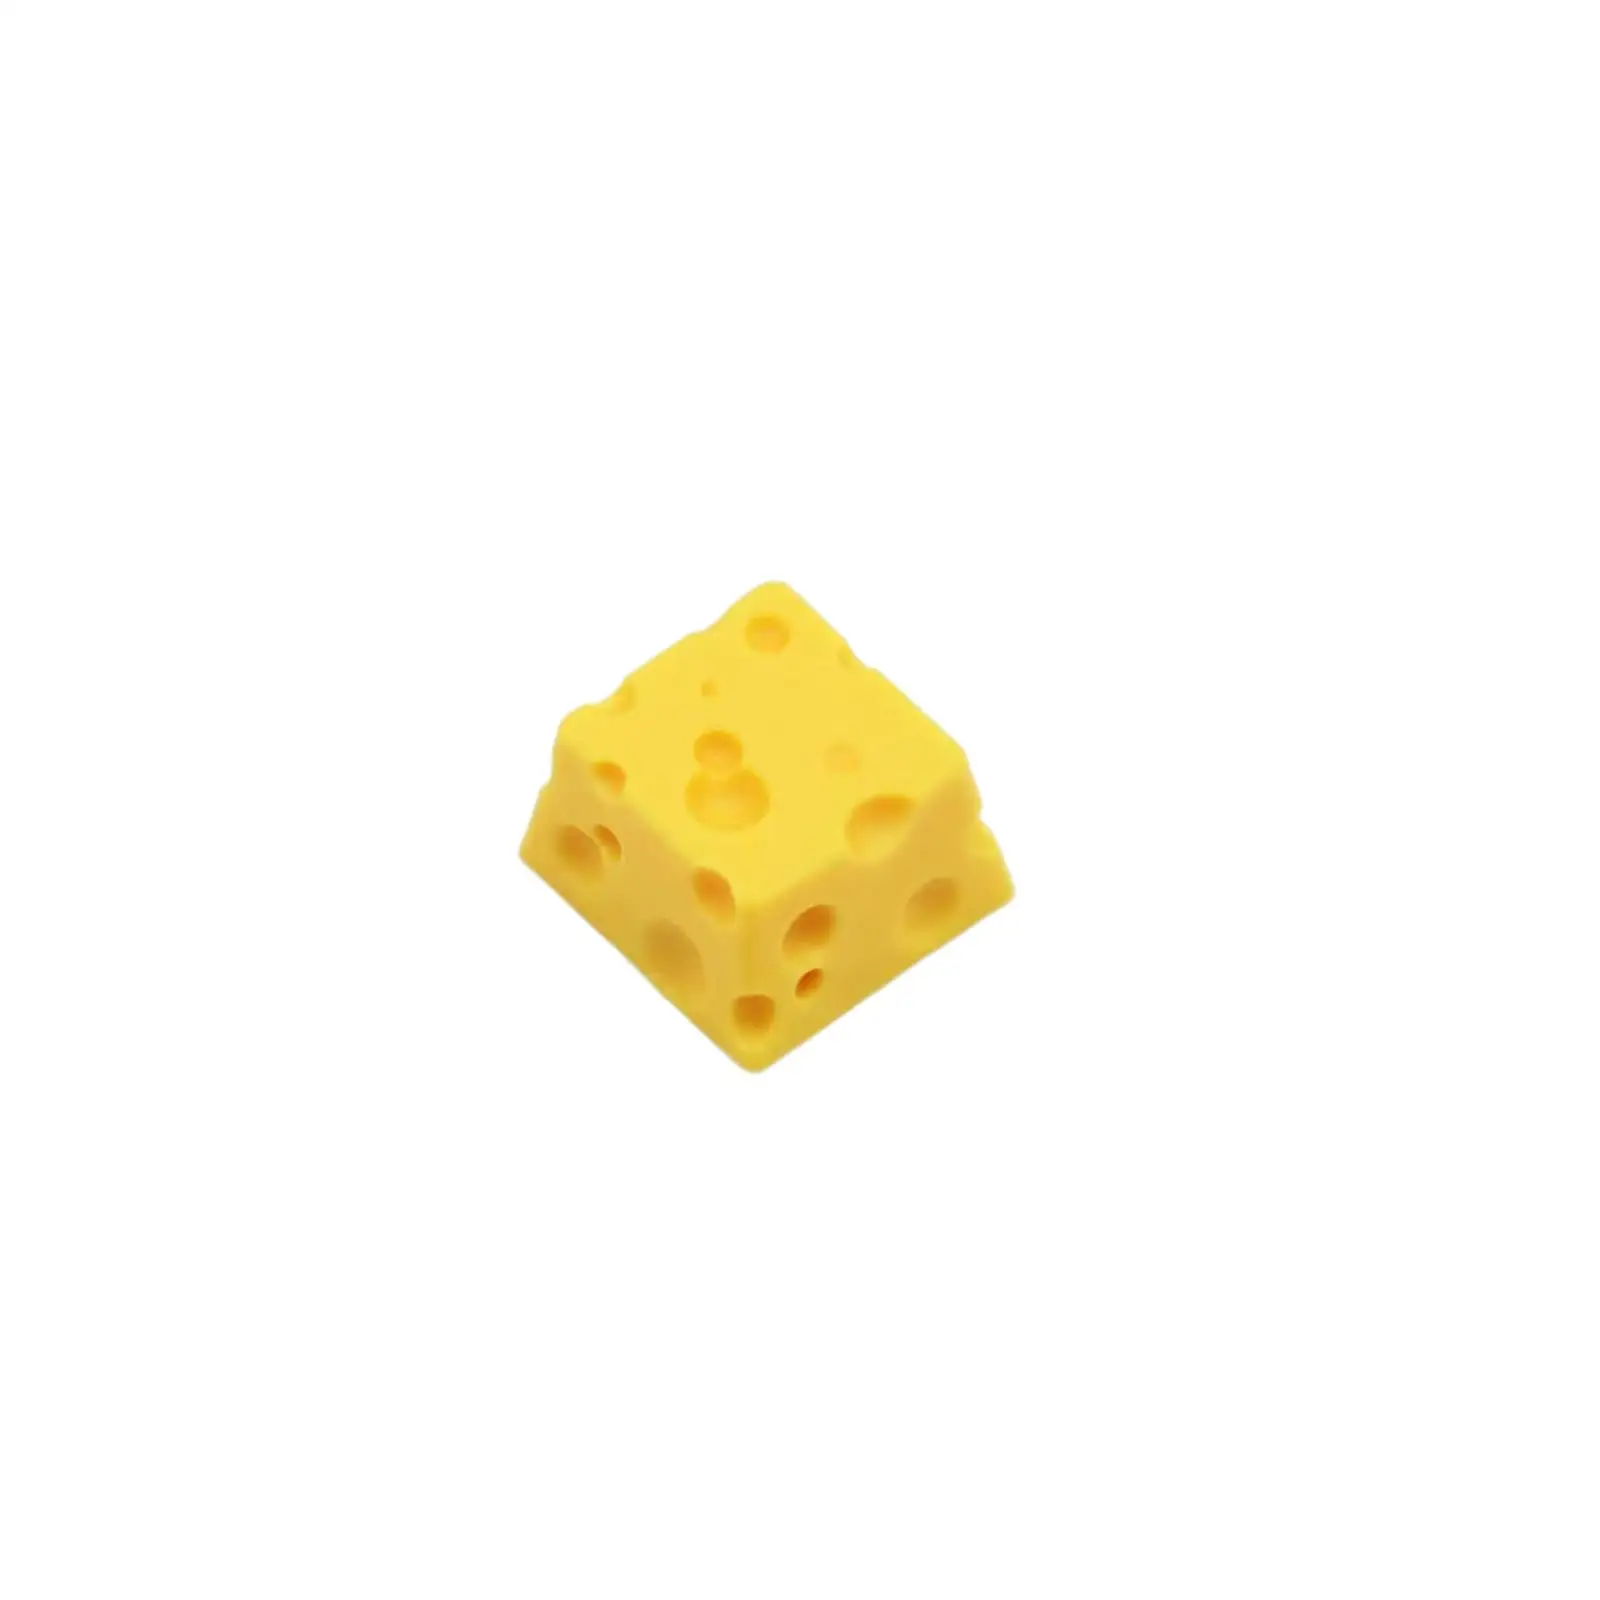 Cheese Keycap Exquisite Cute Keycap Cheese Style Handmade Customized Cheese Cake Key Caps Resin Keycap for Mechanical Keyboard